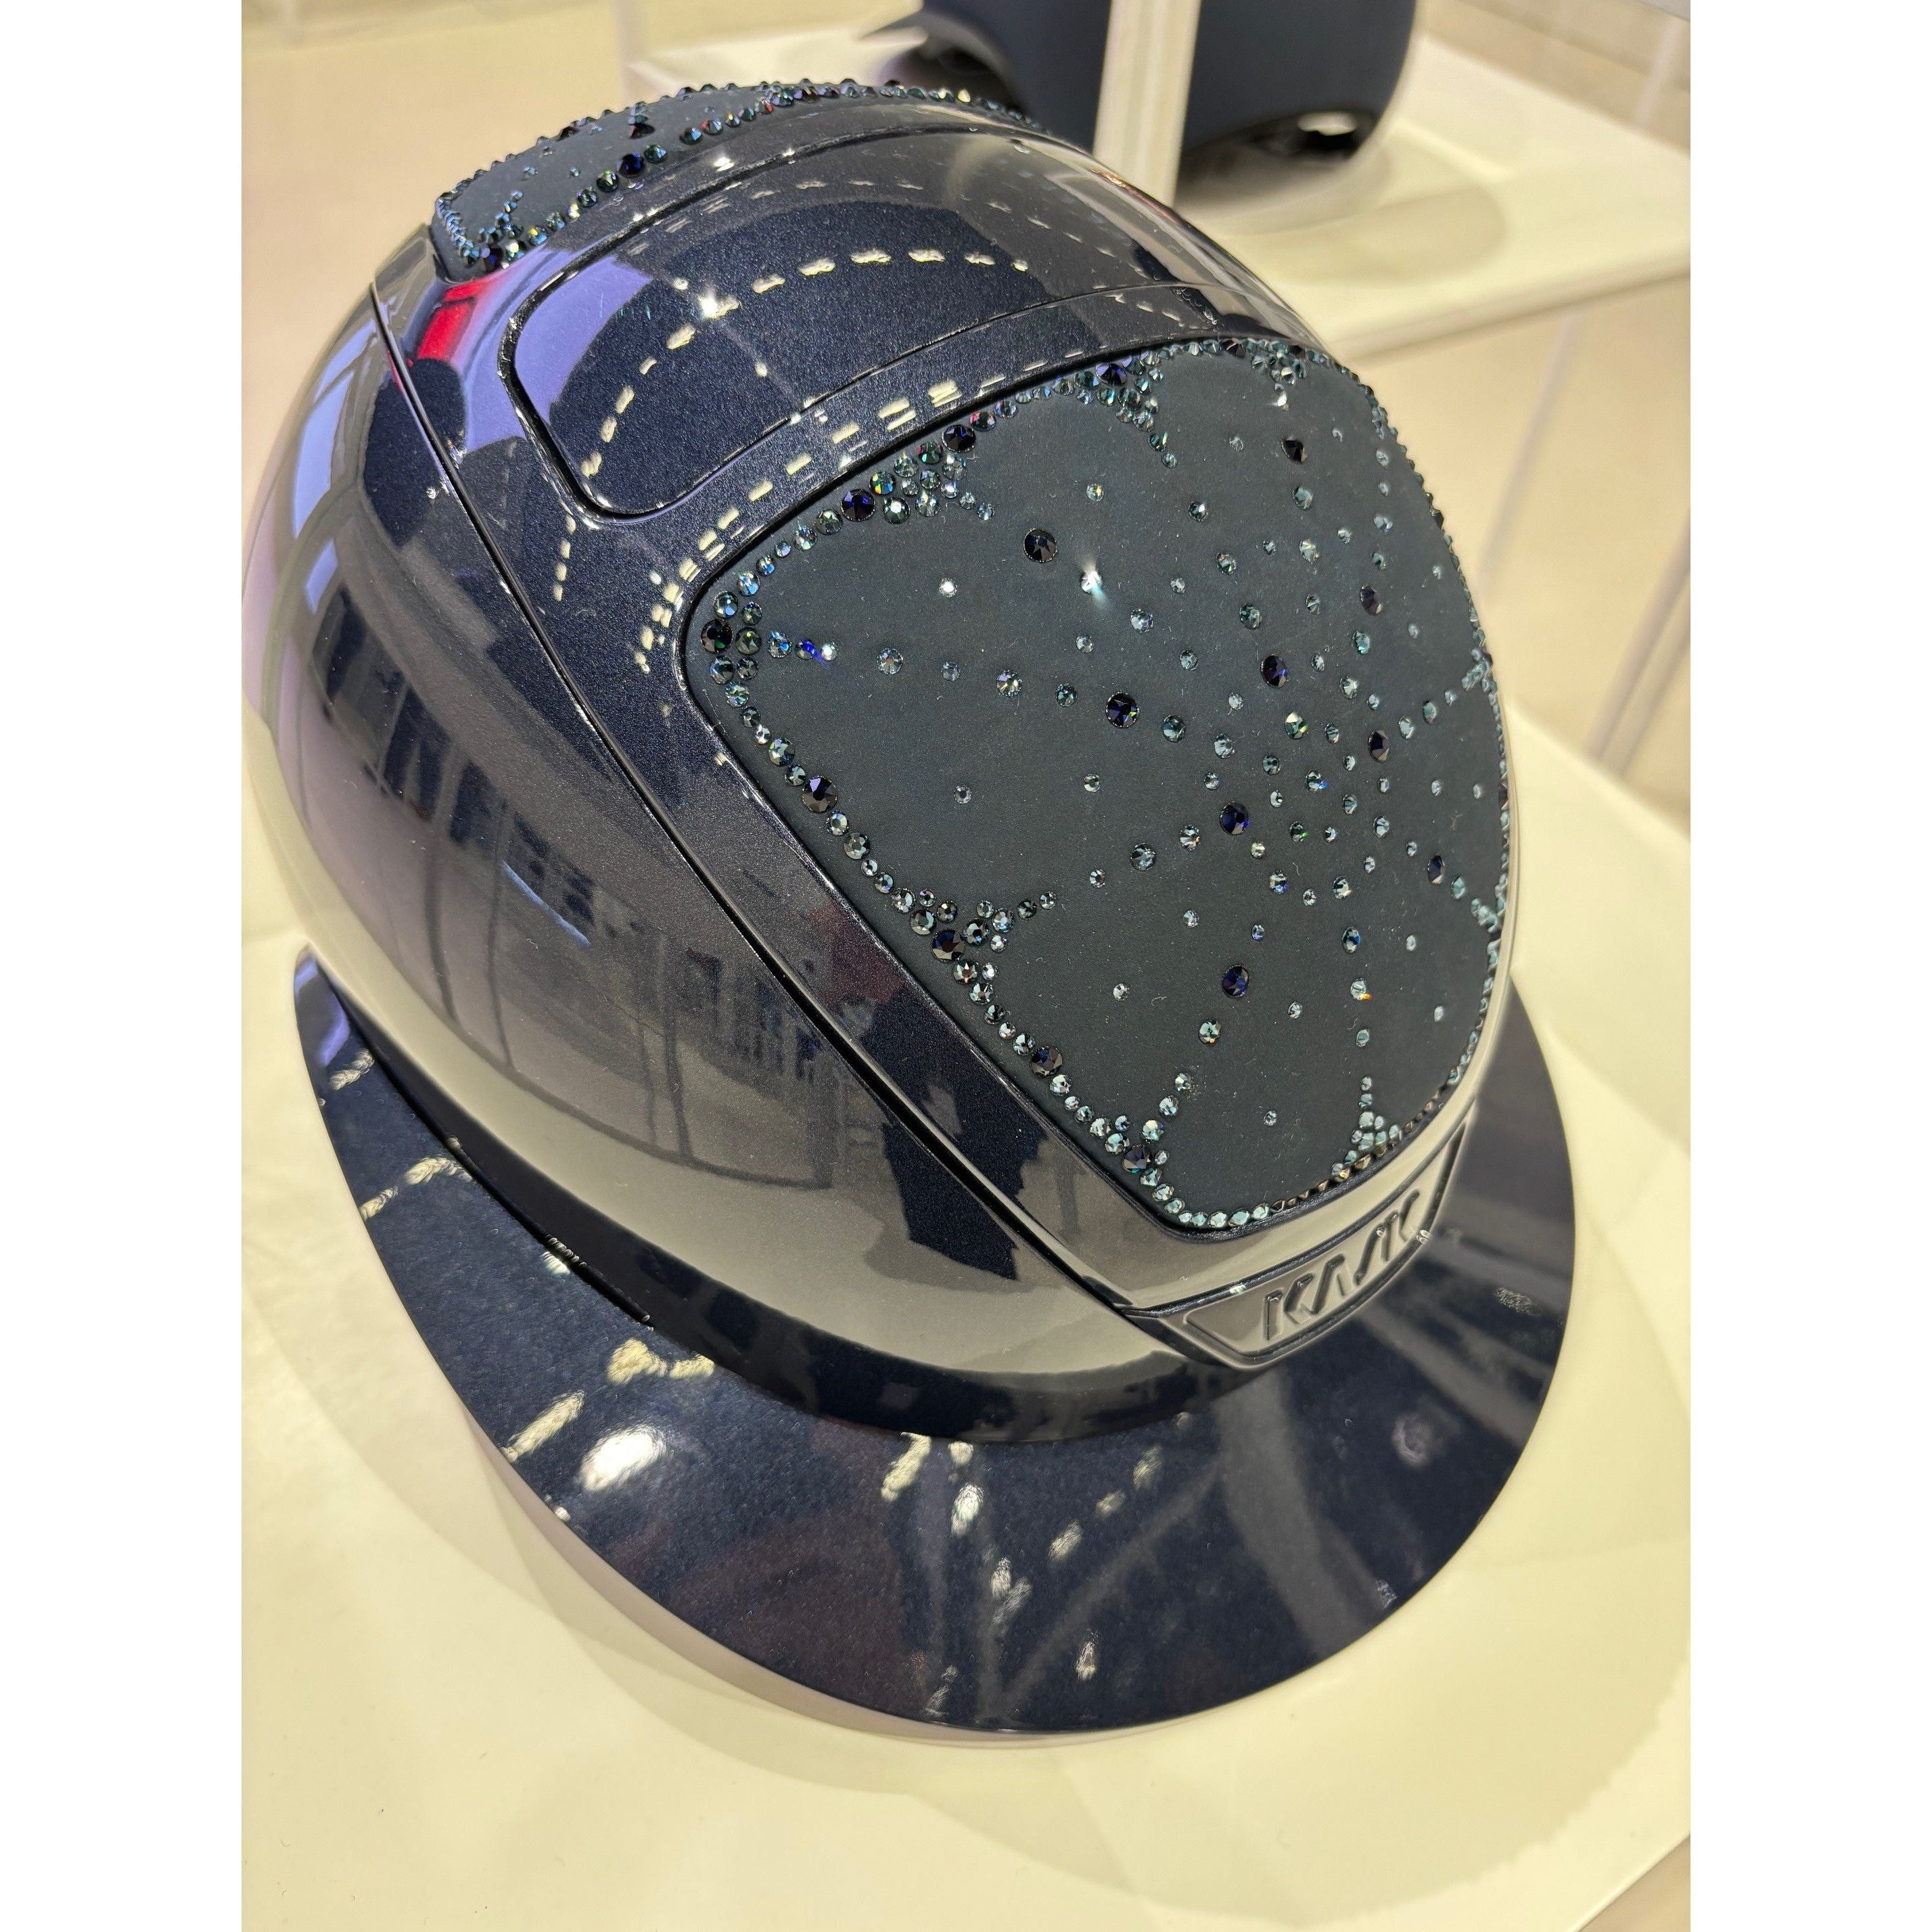 Kask Anima - Introducing the 'Riviera' crystal top